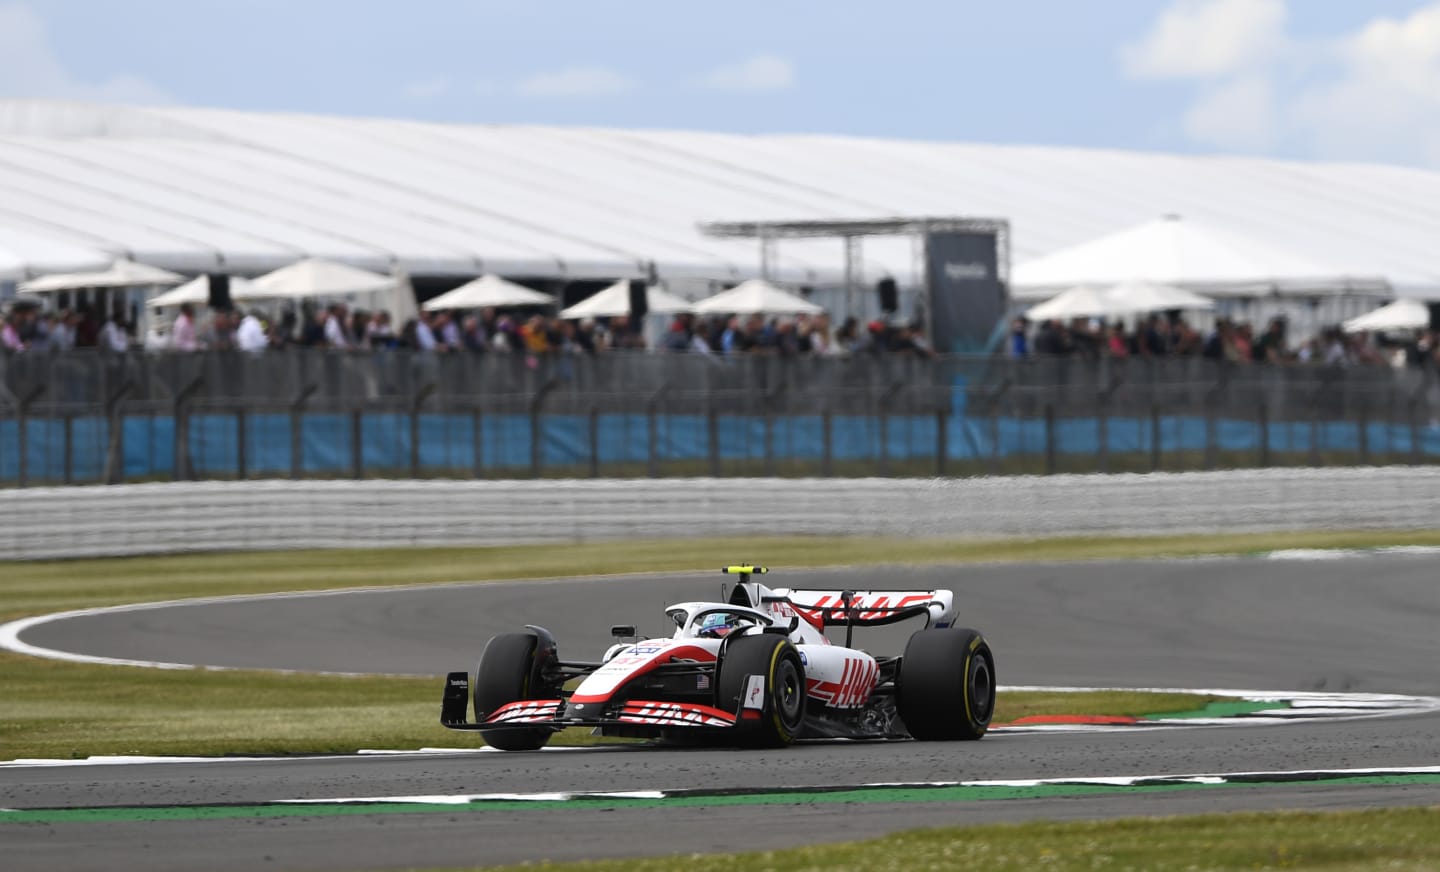 NORTHAMPTON, ENGLAND - JULY 01: Mick Schumacher of Germany driving the (47) Haas F1 VF-22 Ferrari on track during practice ahead of the F1 Grand Prix of Great Britain at Silverstone on July 01, 2022 in Northampton, England. (Photo by Rudy Carezzevoli - Formula 1/Formula 1 via Getty Images)